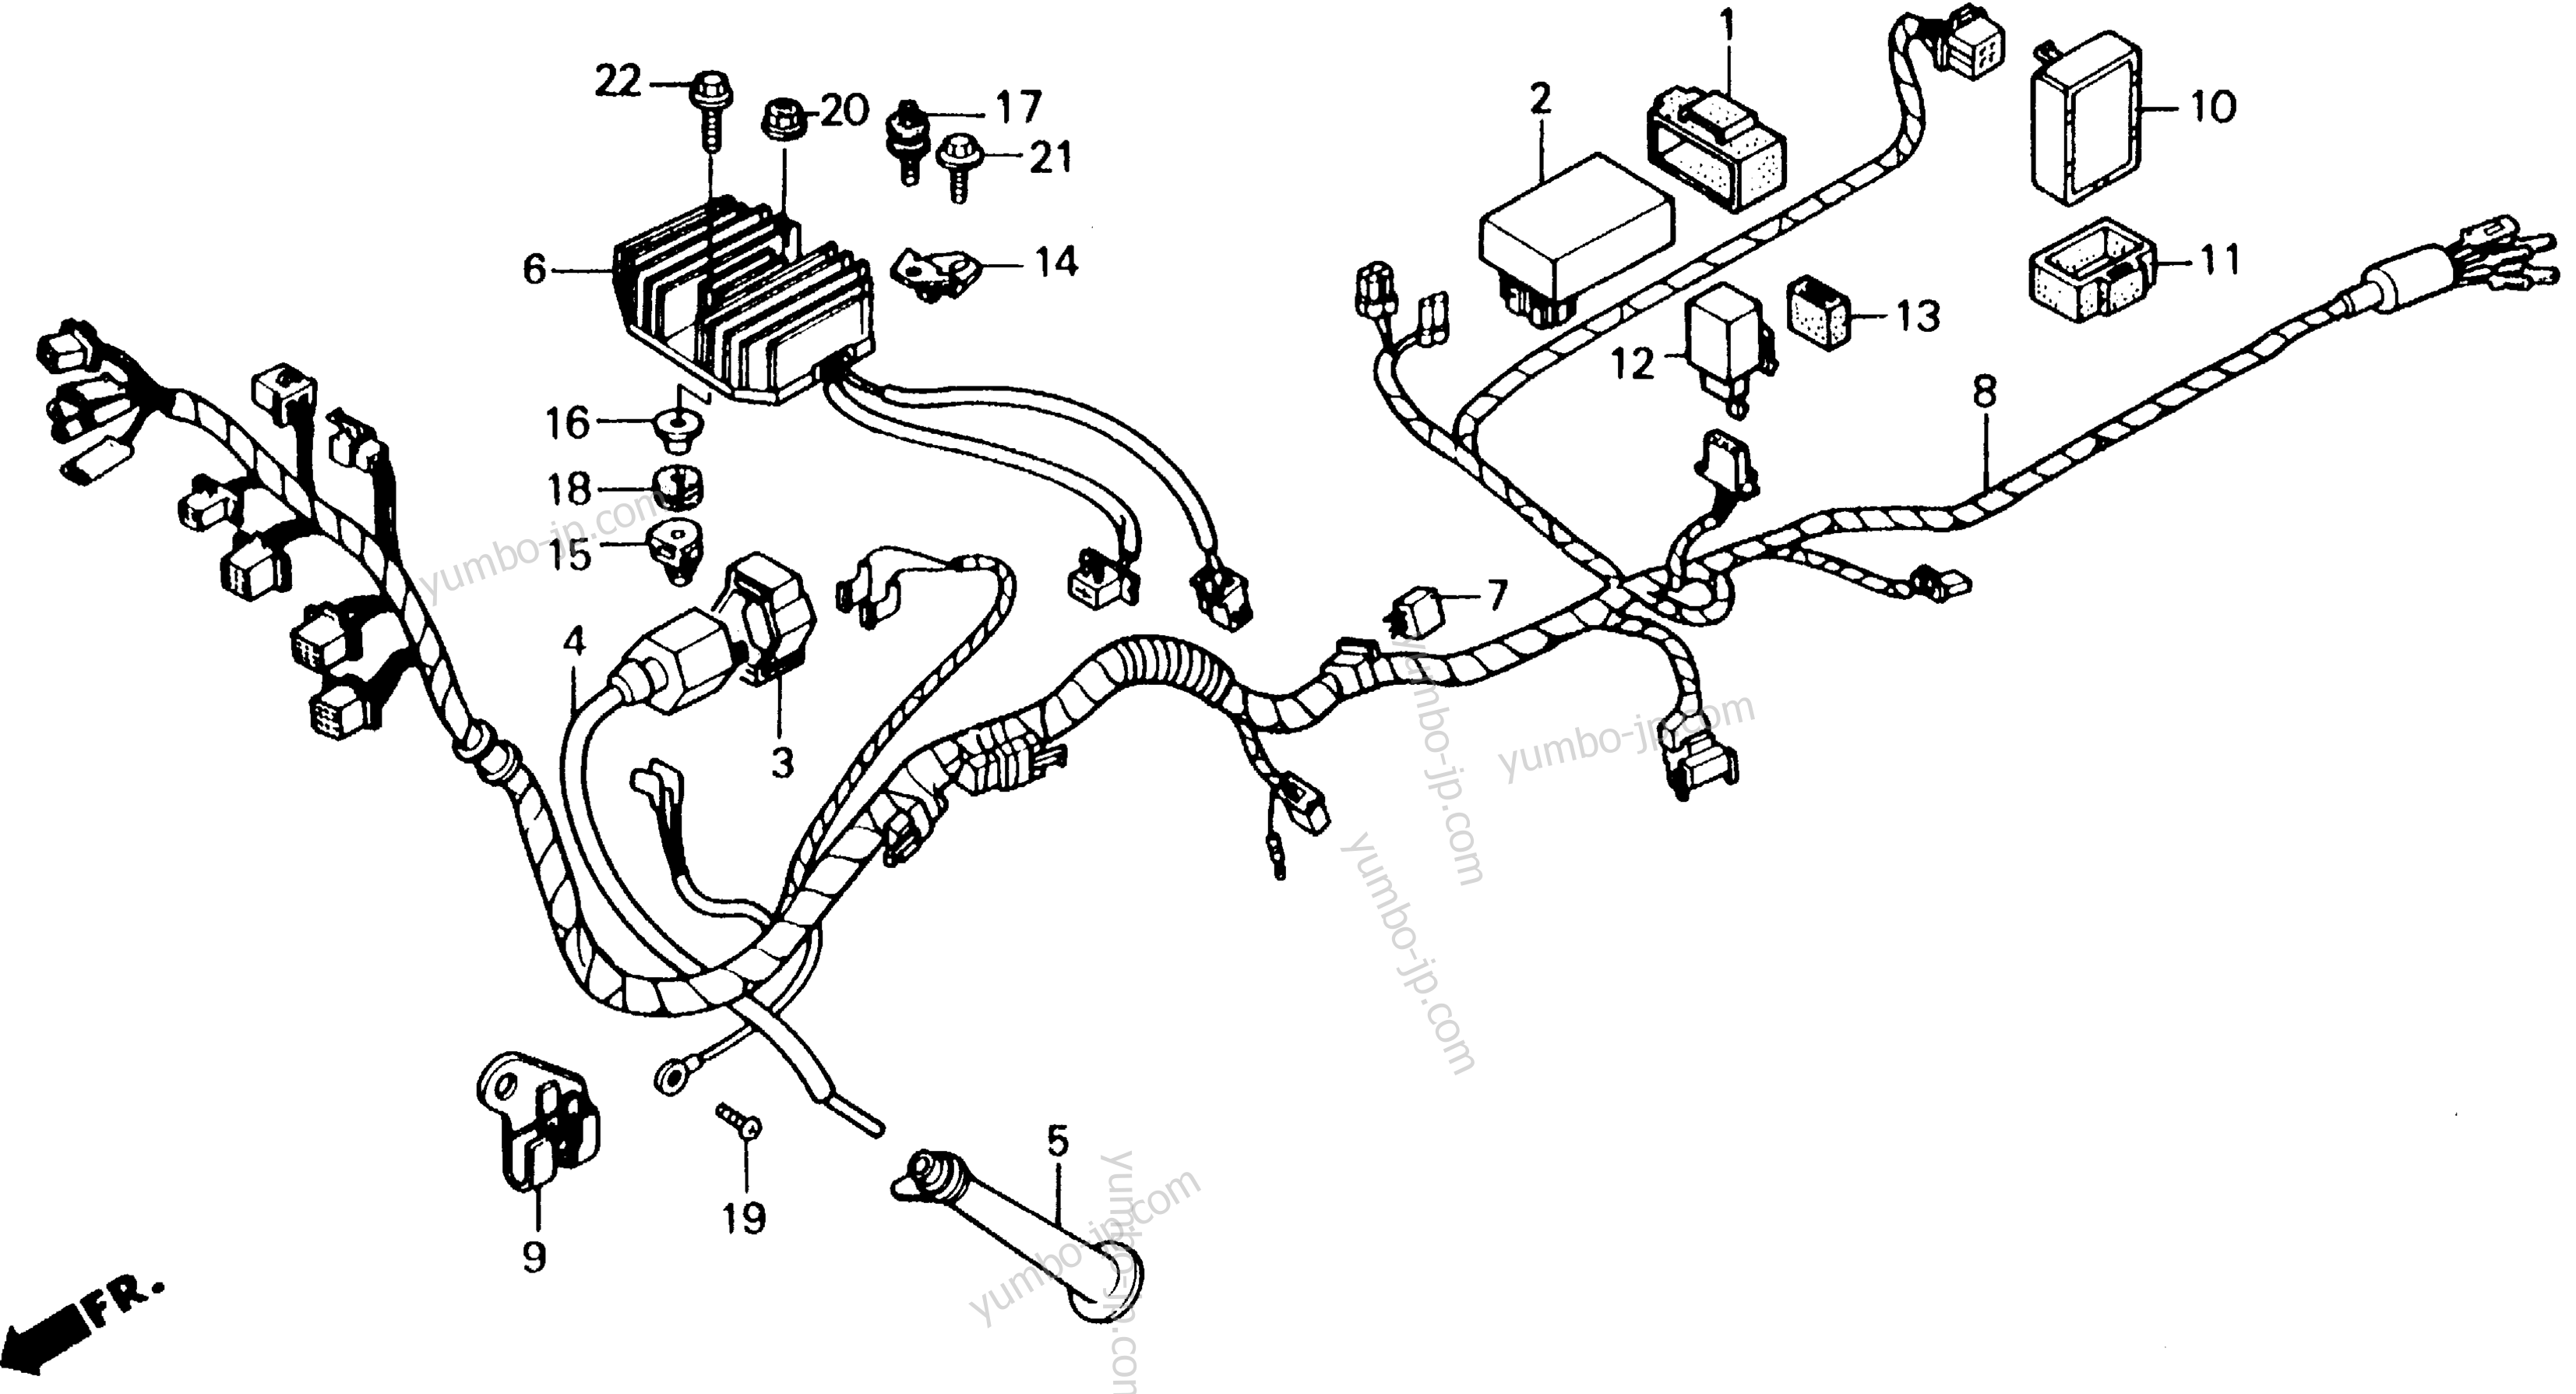 WIRE HARNESS for motorcycles HONDA GB500 AC 1990 year